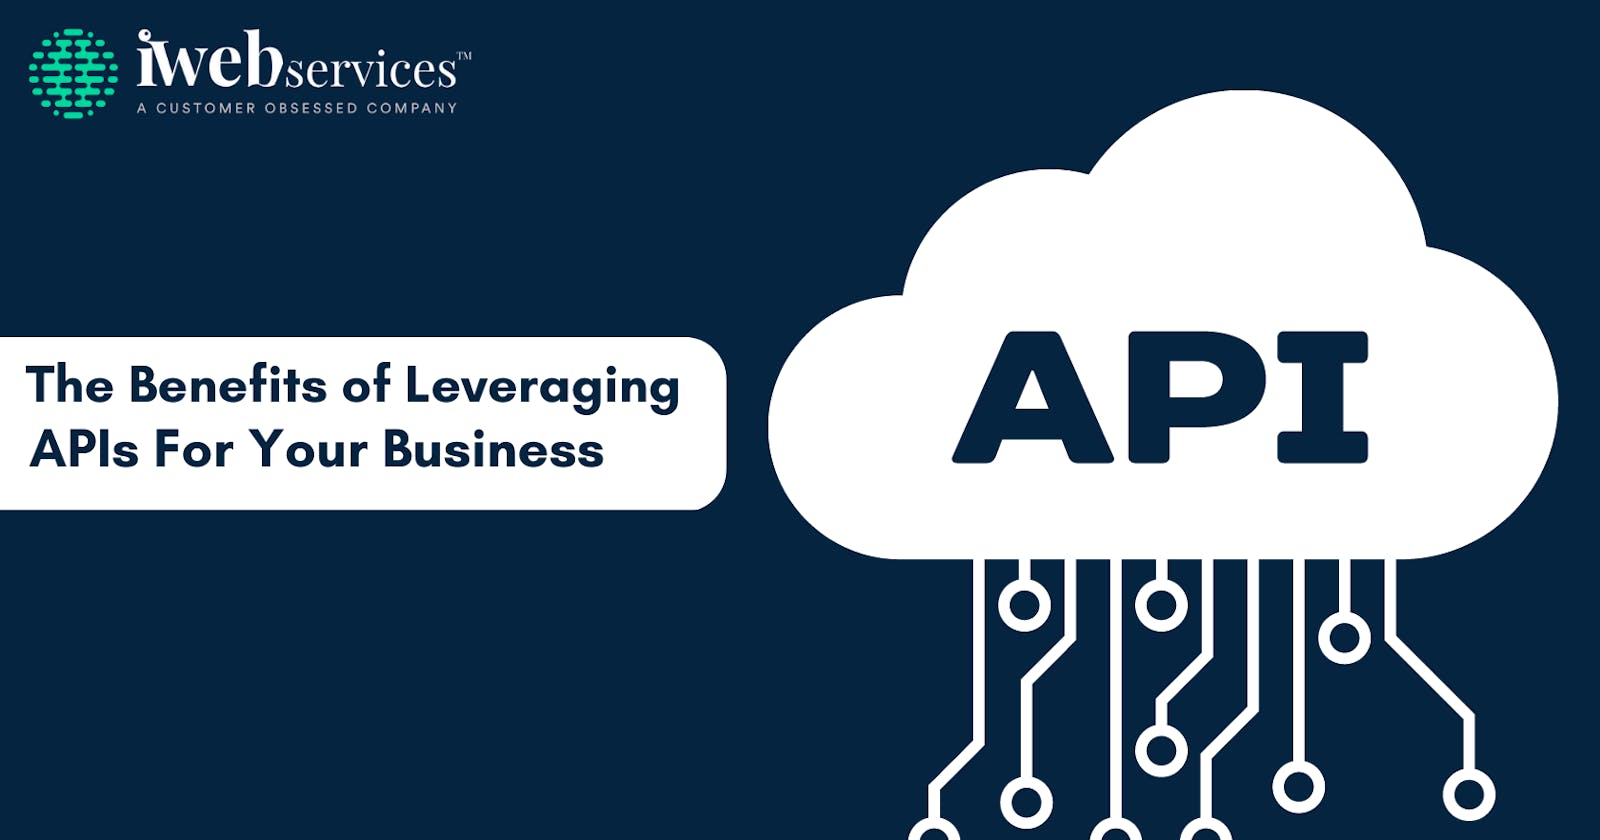 The Benefits of Leveraging APIs For Your Business